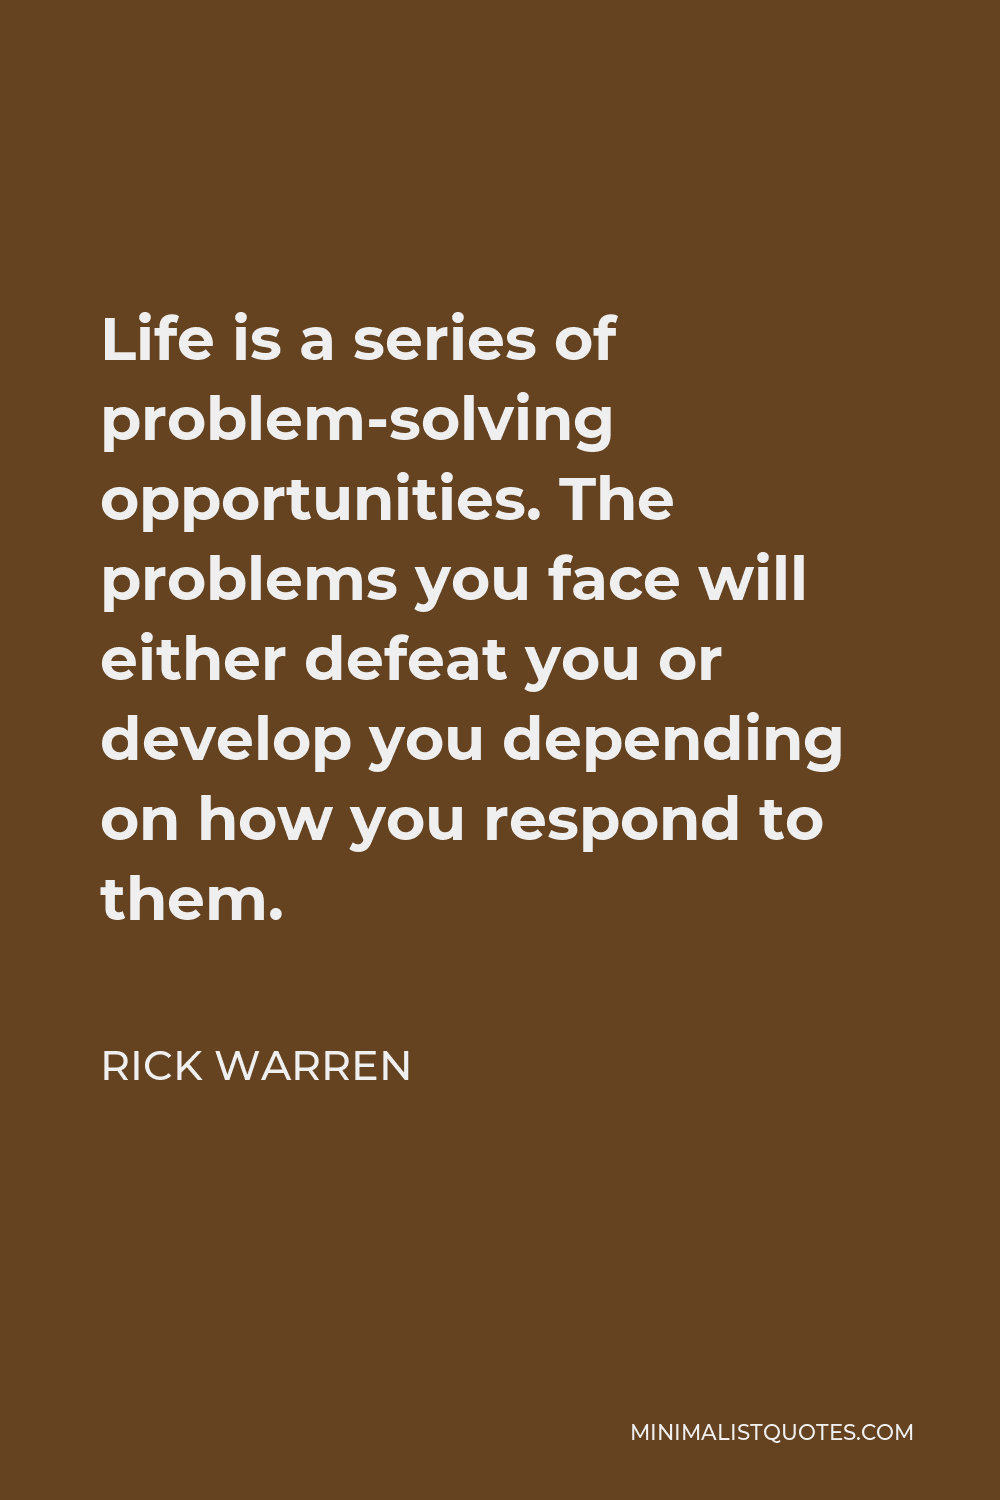 Rick Warren Quote - Life is a series of problem-solving opportunities. The problems you face will either defeat you or develop you depending on how you respond to them.